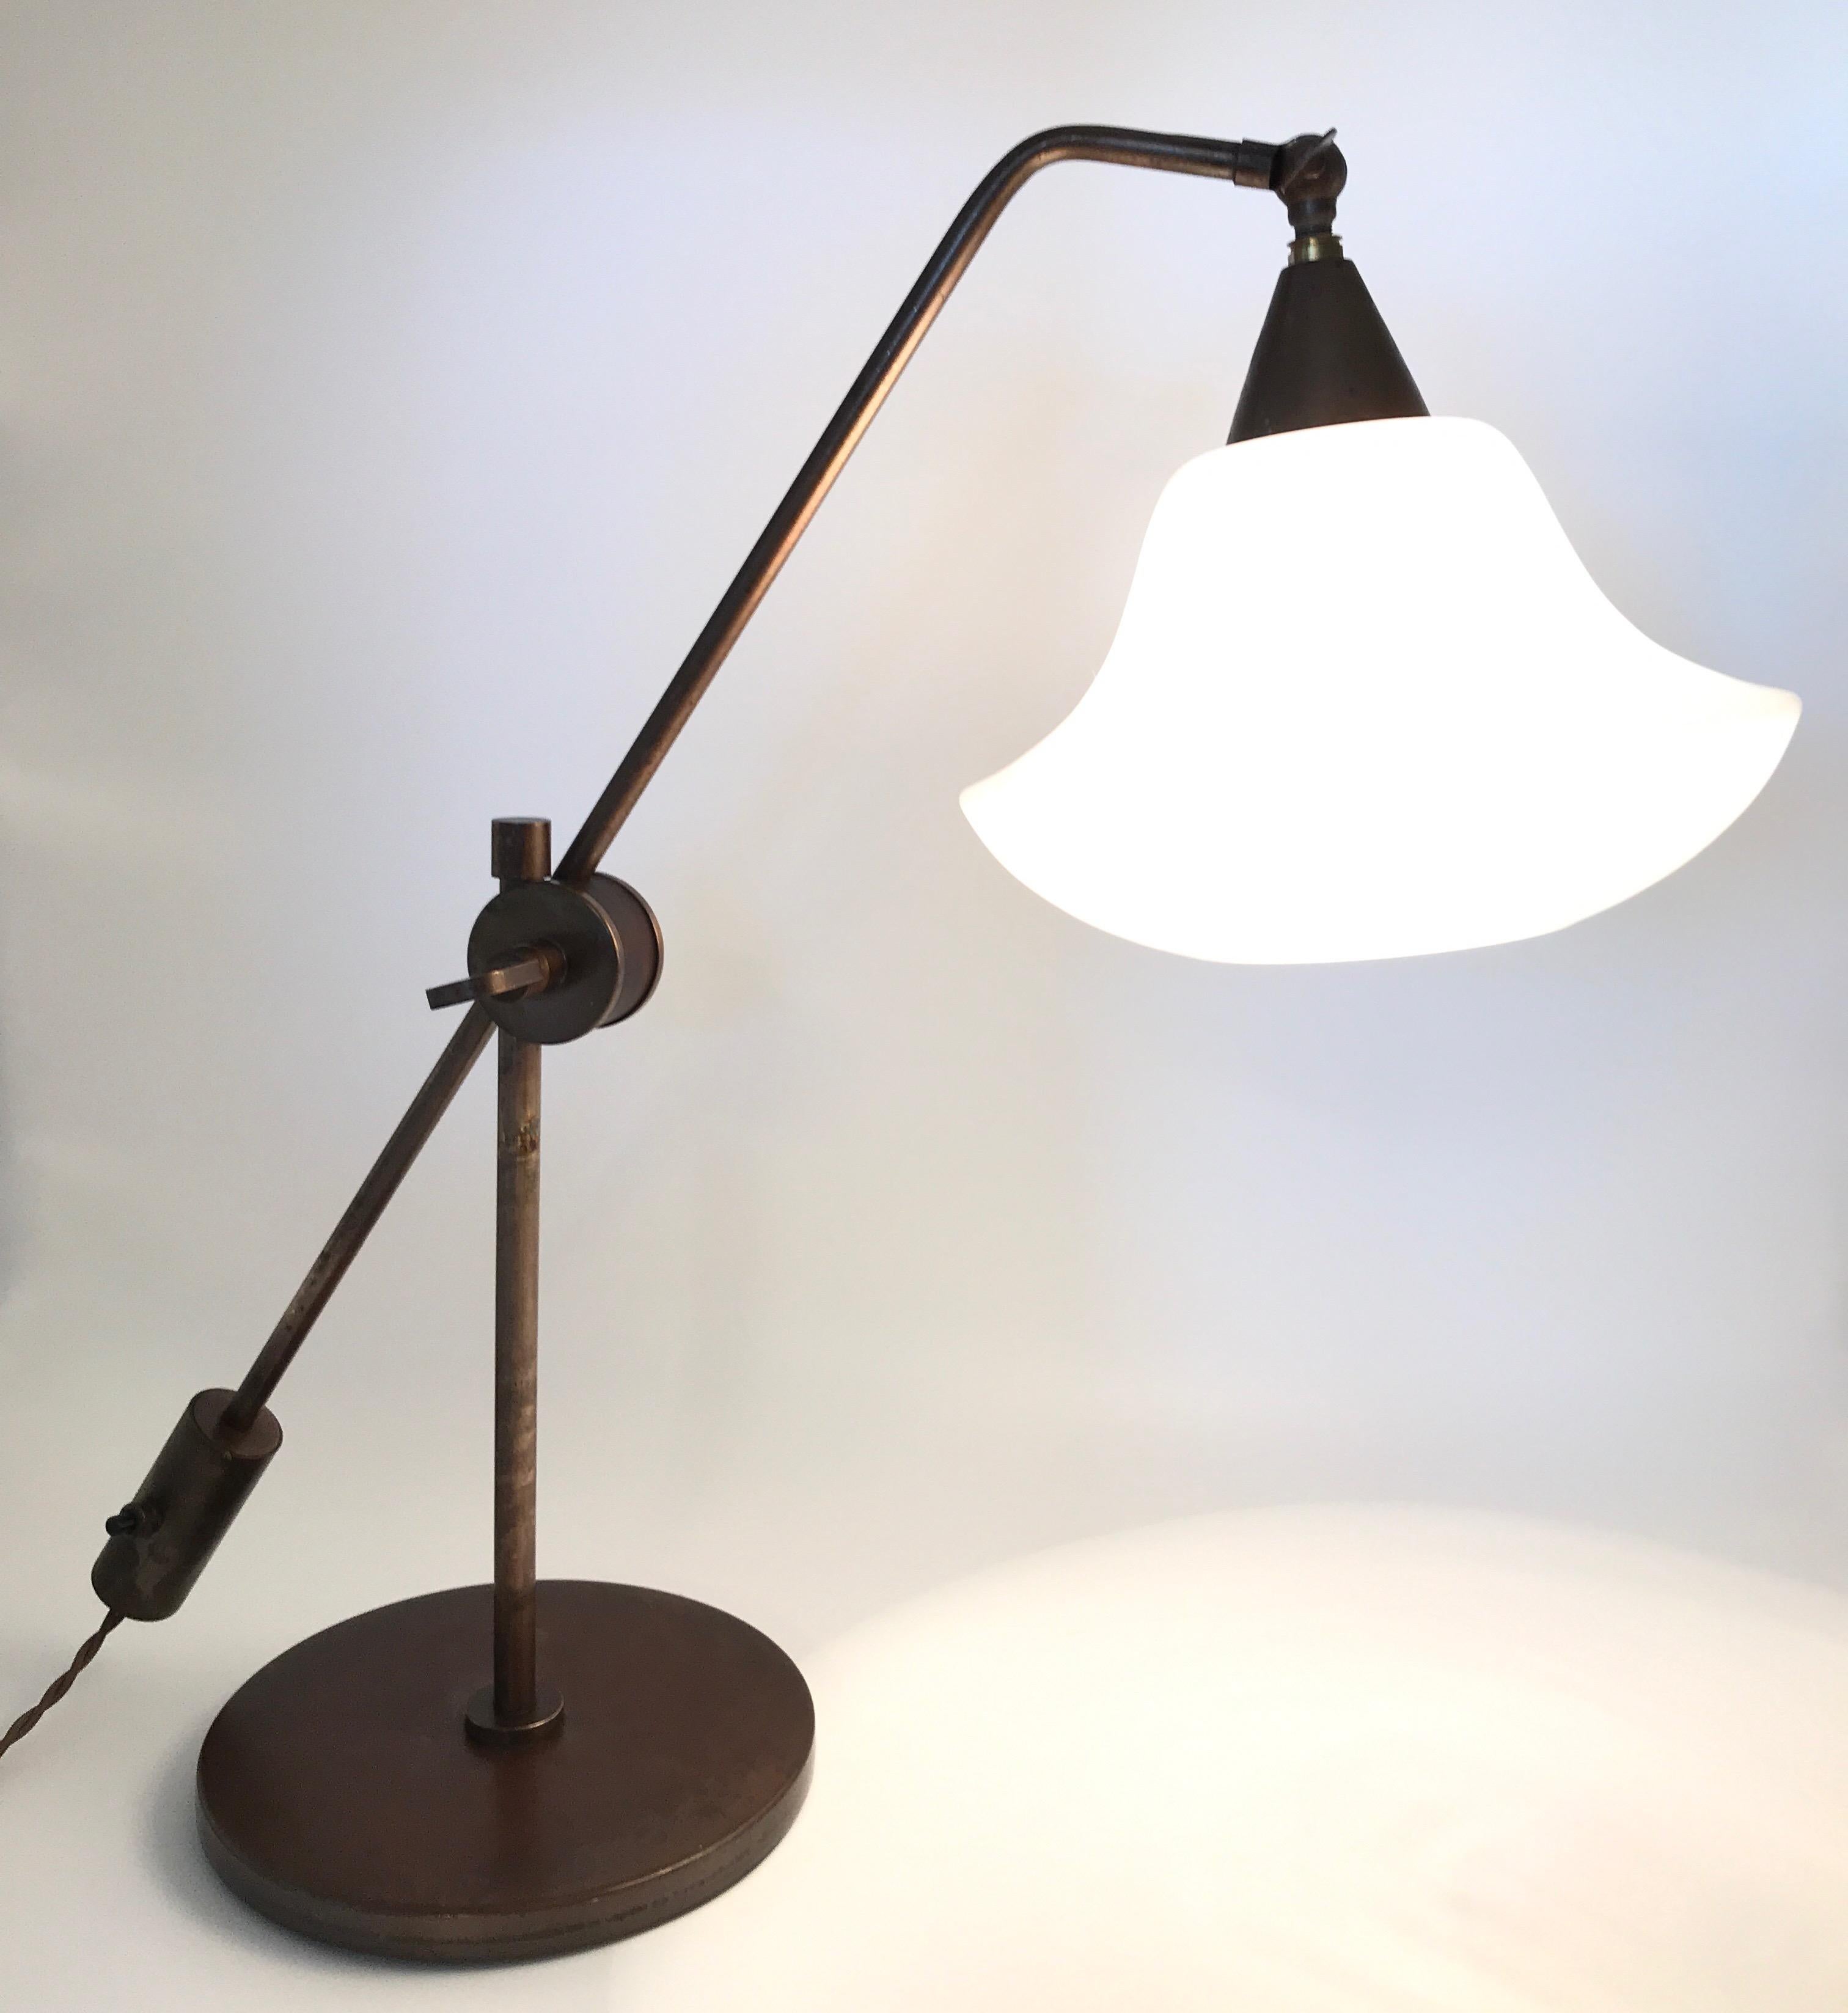 Vintage Danish Table Lamp in Copper with an Opaline Glass Shade from the 1950s 7